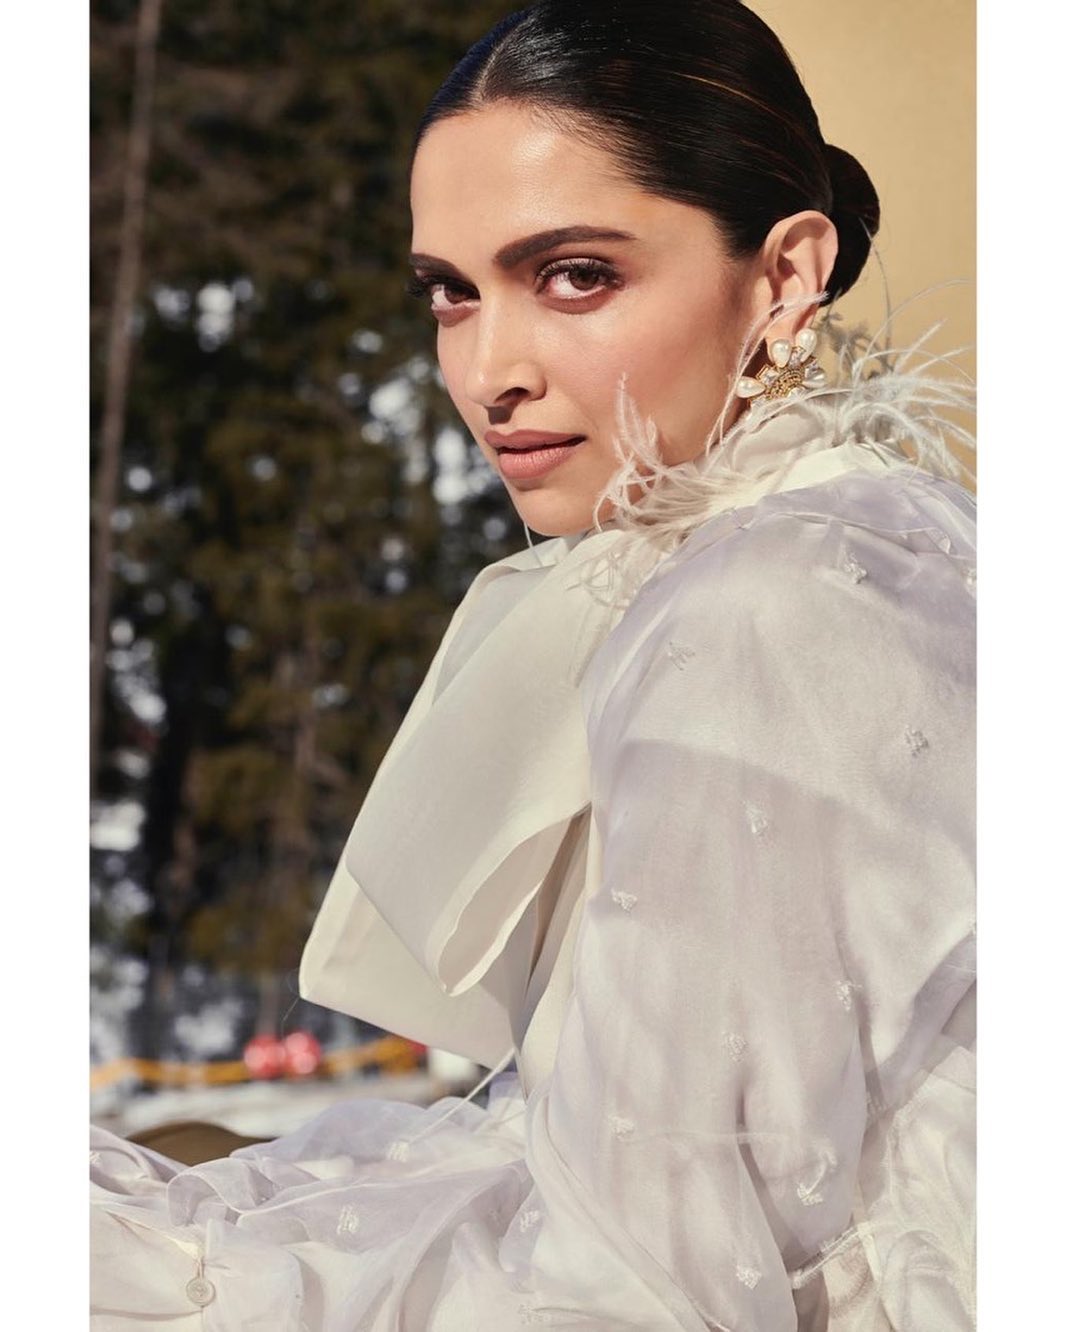 Deepika Padukone for BoF 500 gala in a Louis Vuitton jacket and Cartier  bracelet. Styled by Shaleena Nathani. : r/BollywoodFashion